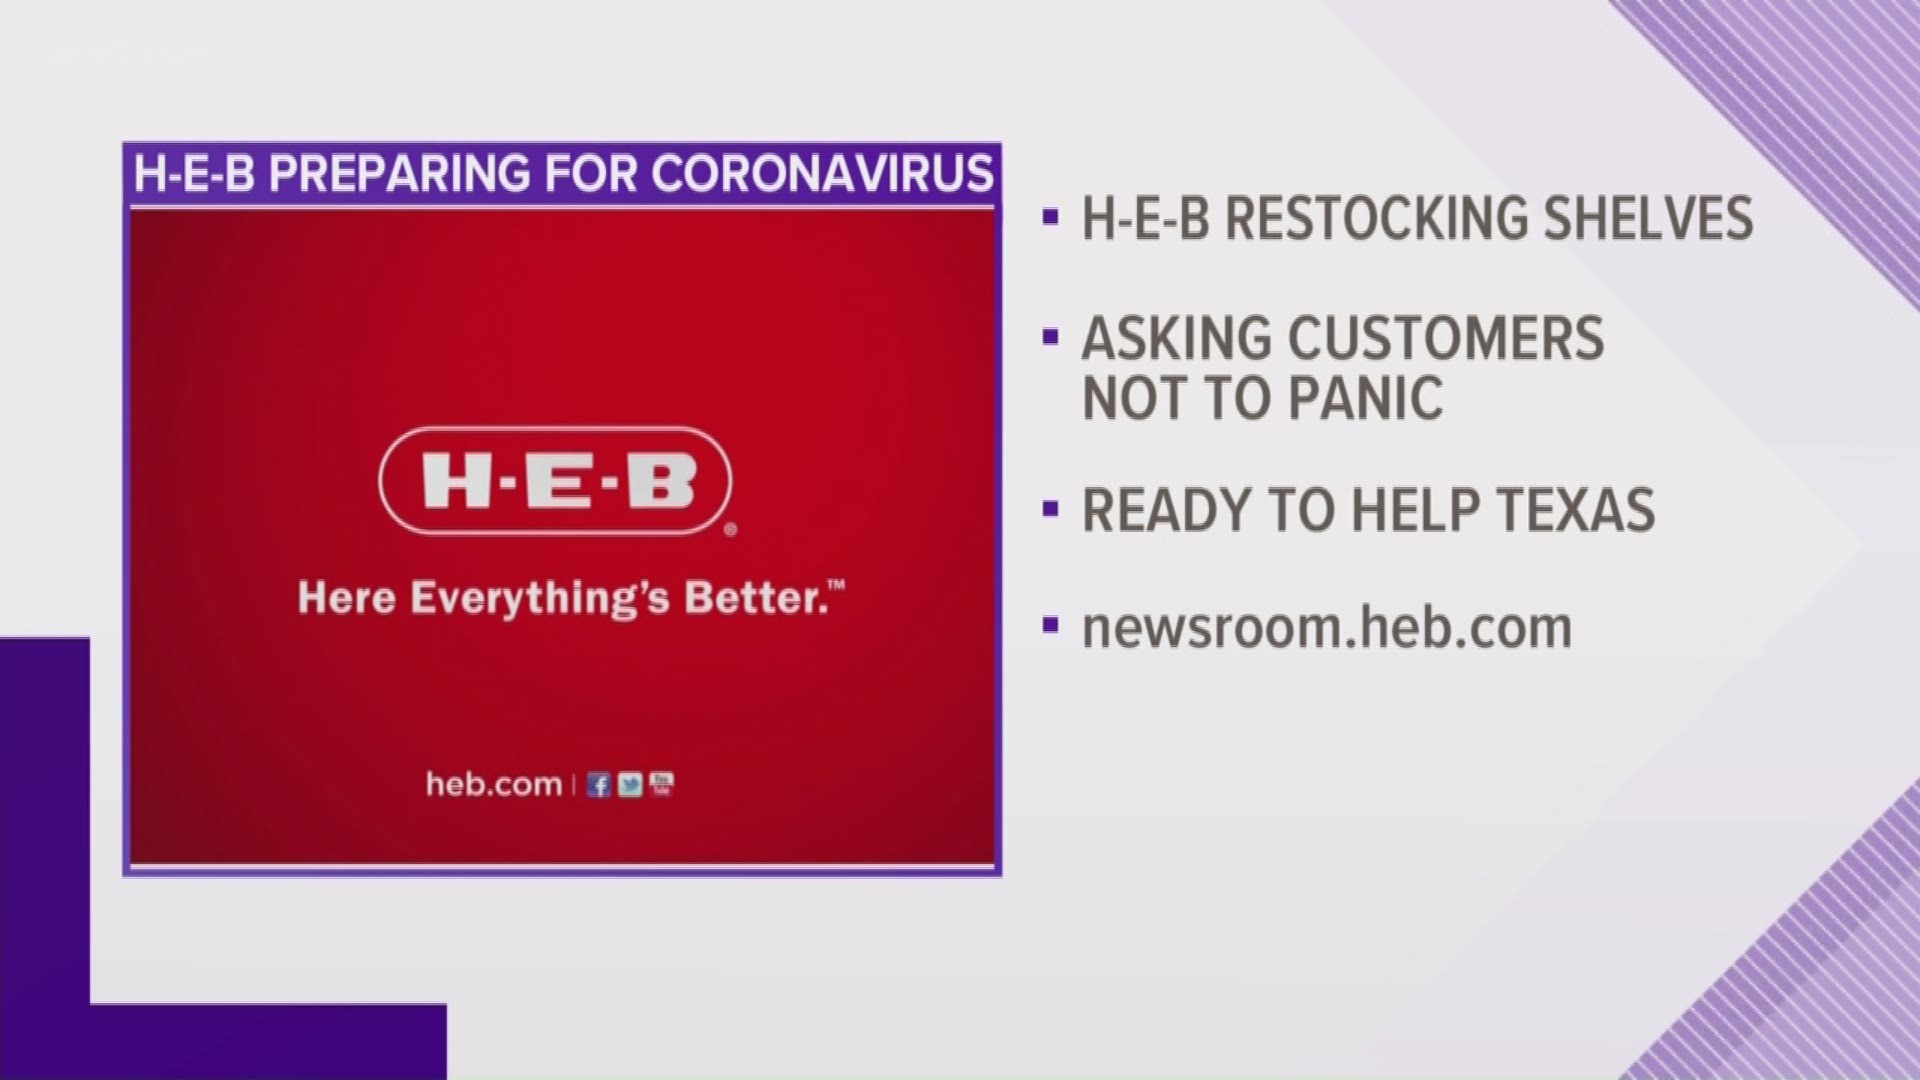 The grocery chain says it's been preparing for coronavirus to impact the local community for some time now.